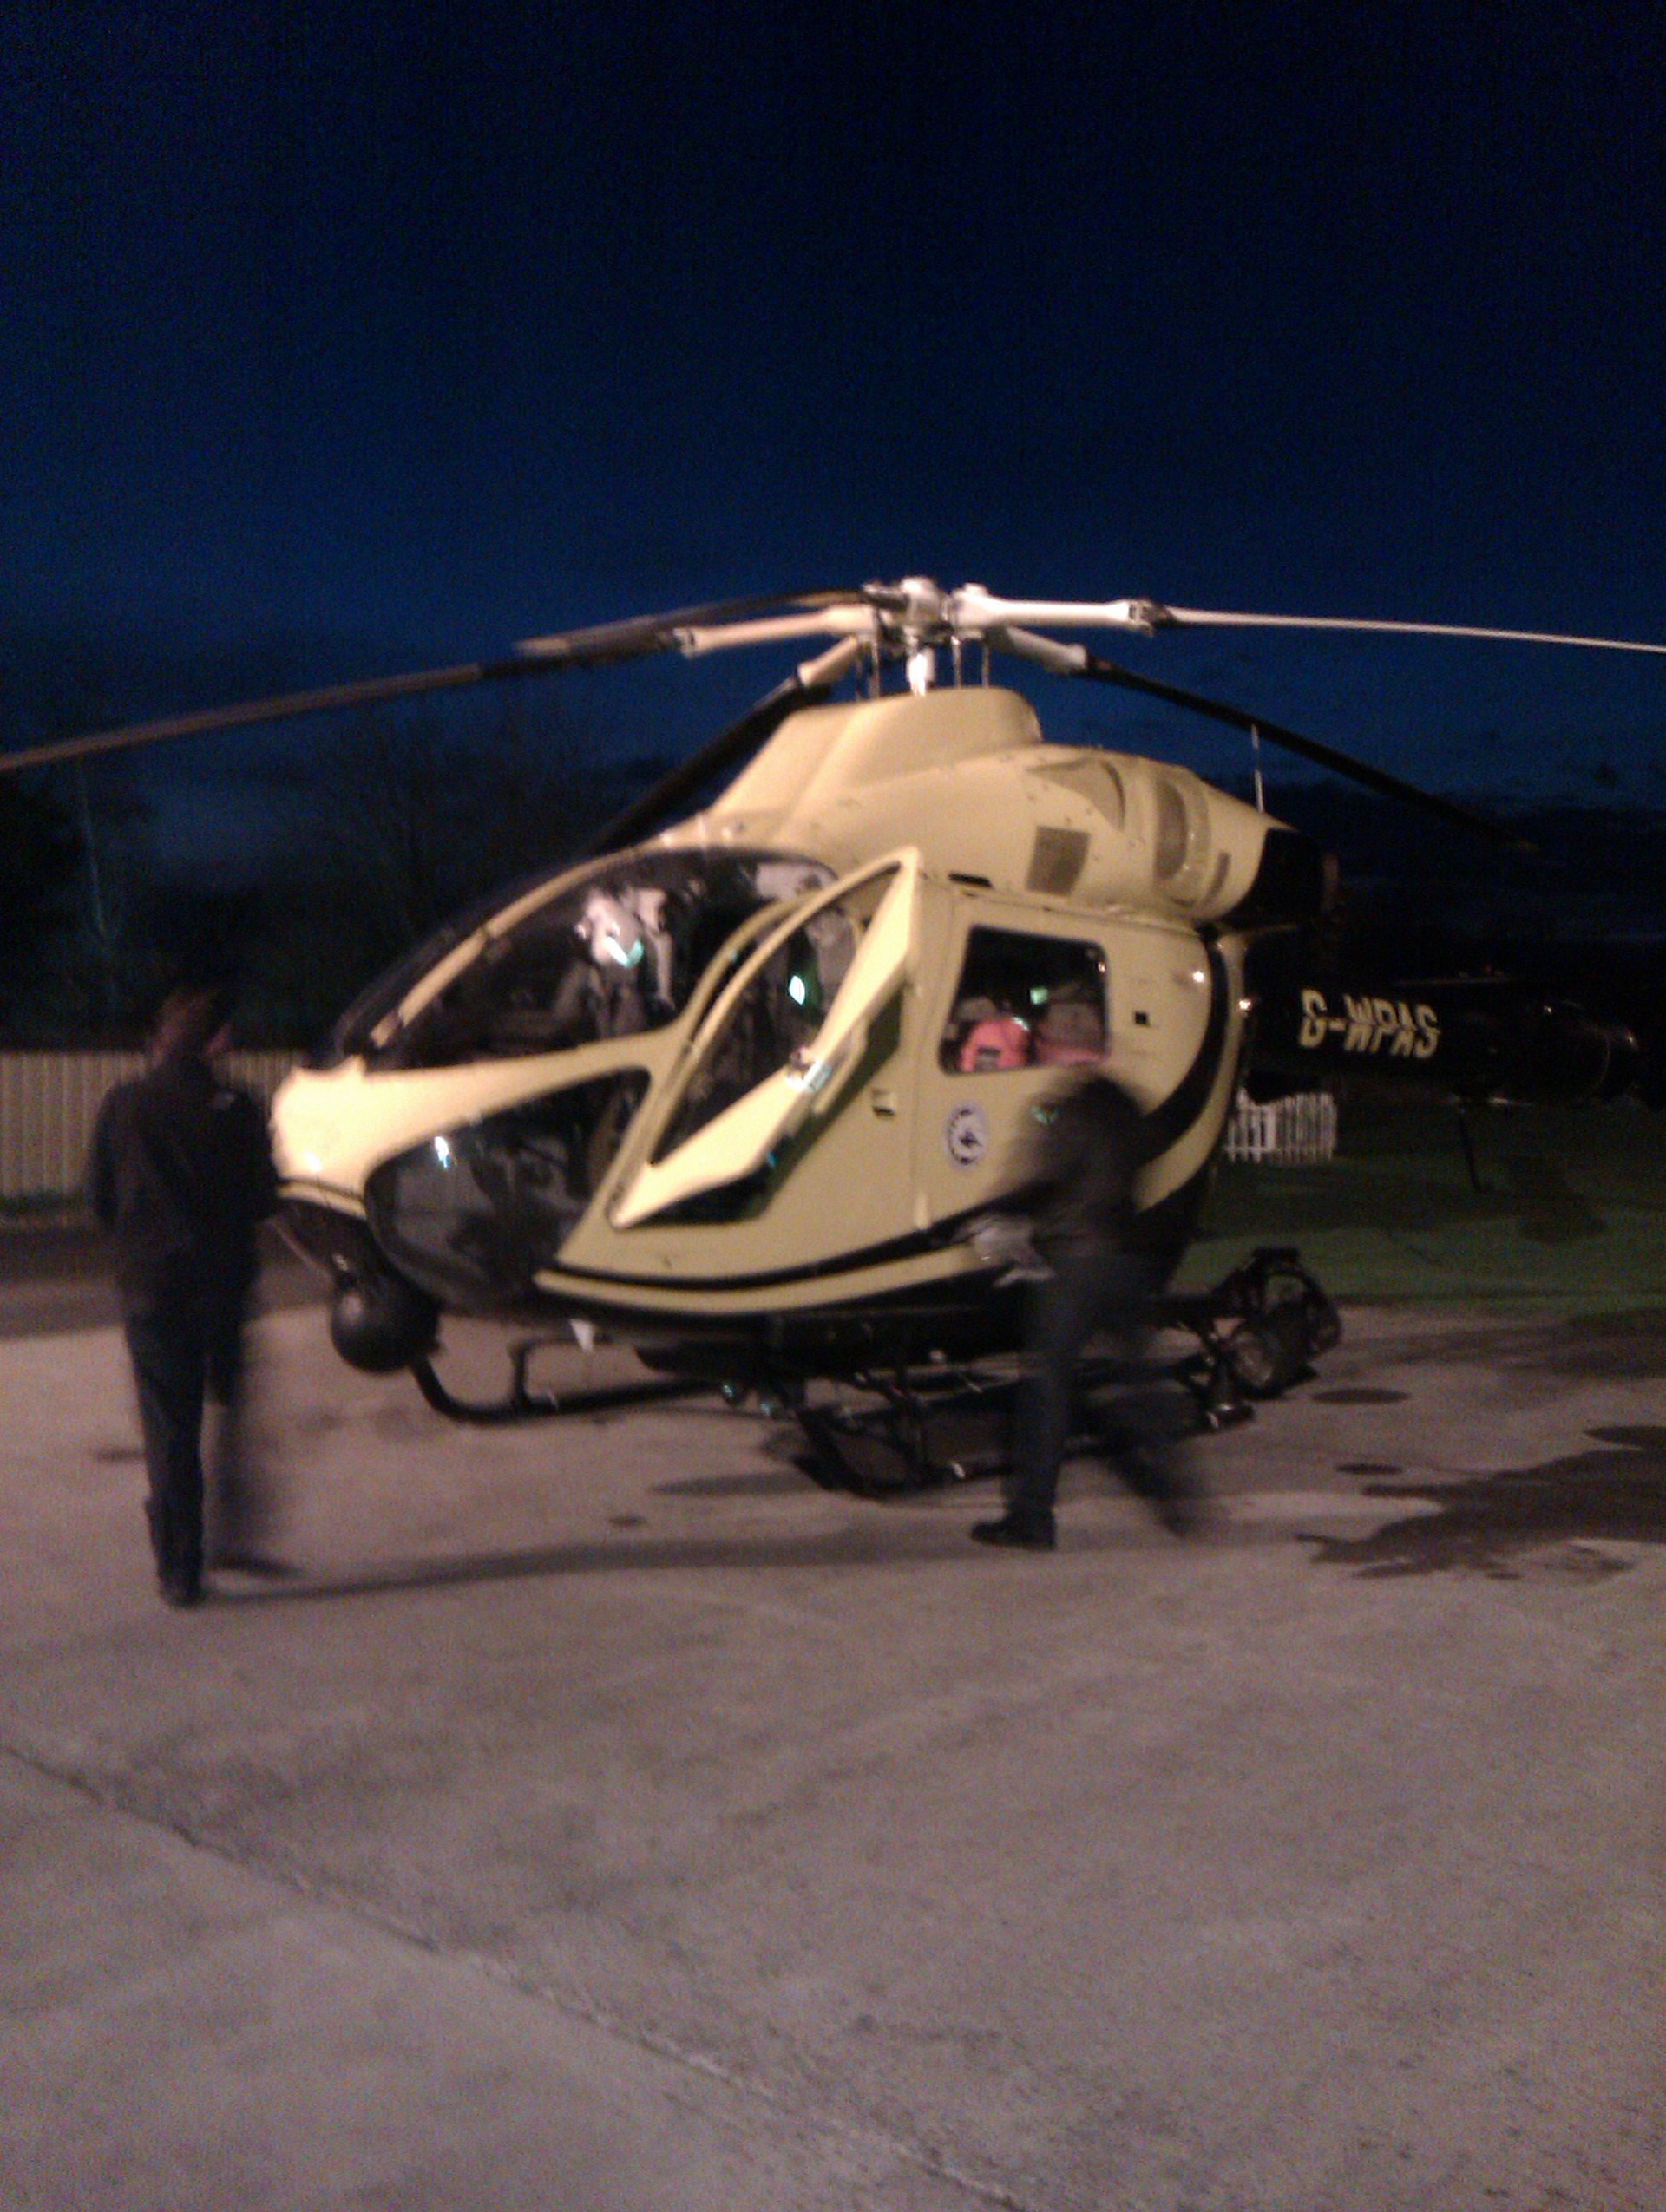 The MD902 helicopter on its helipad in Devizes on the night of Stuart's incident